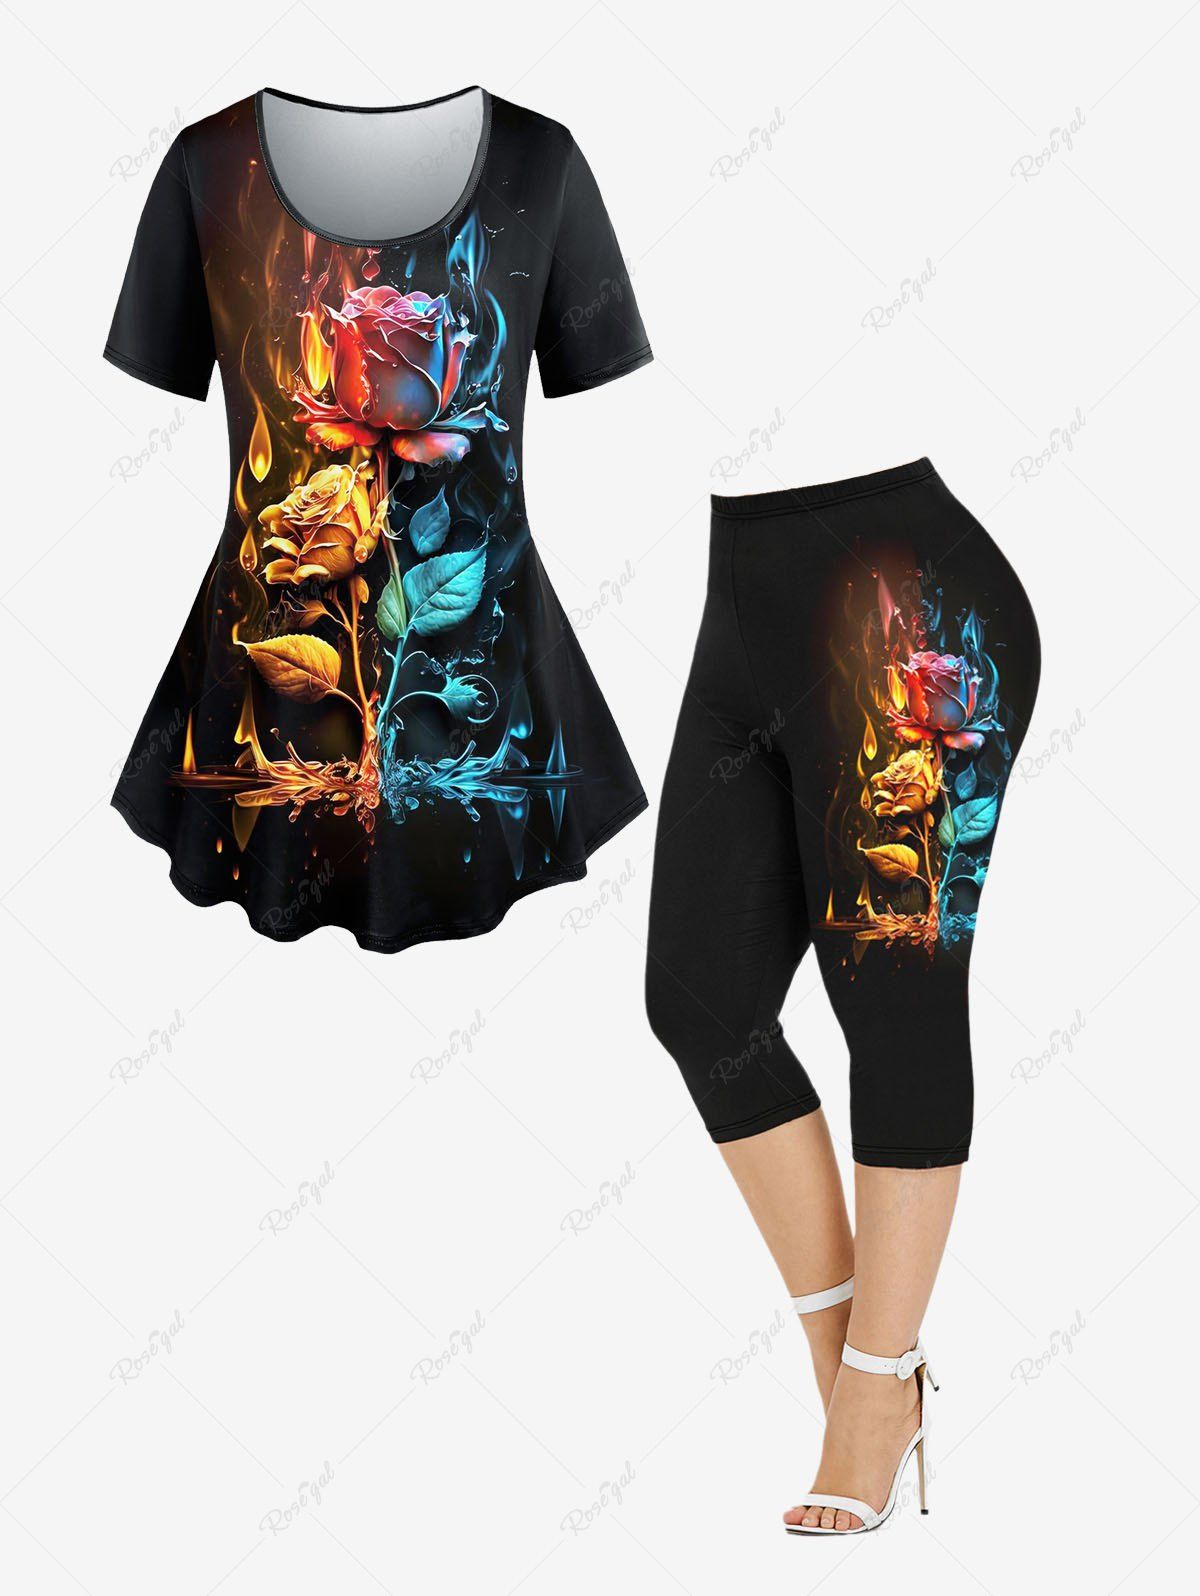 Shop Flower Leaves Flame Printed Short Sleeves T-shirt and Pockets Capri Leggings Plus Size Outfit  